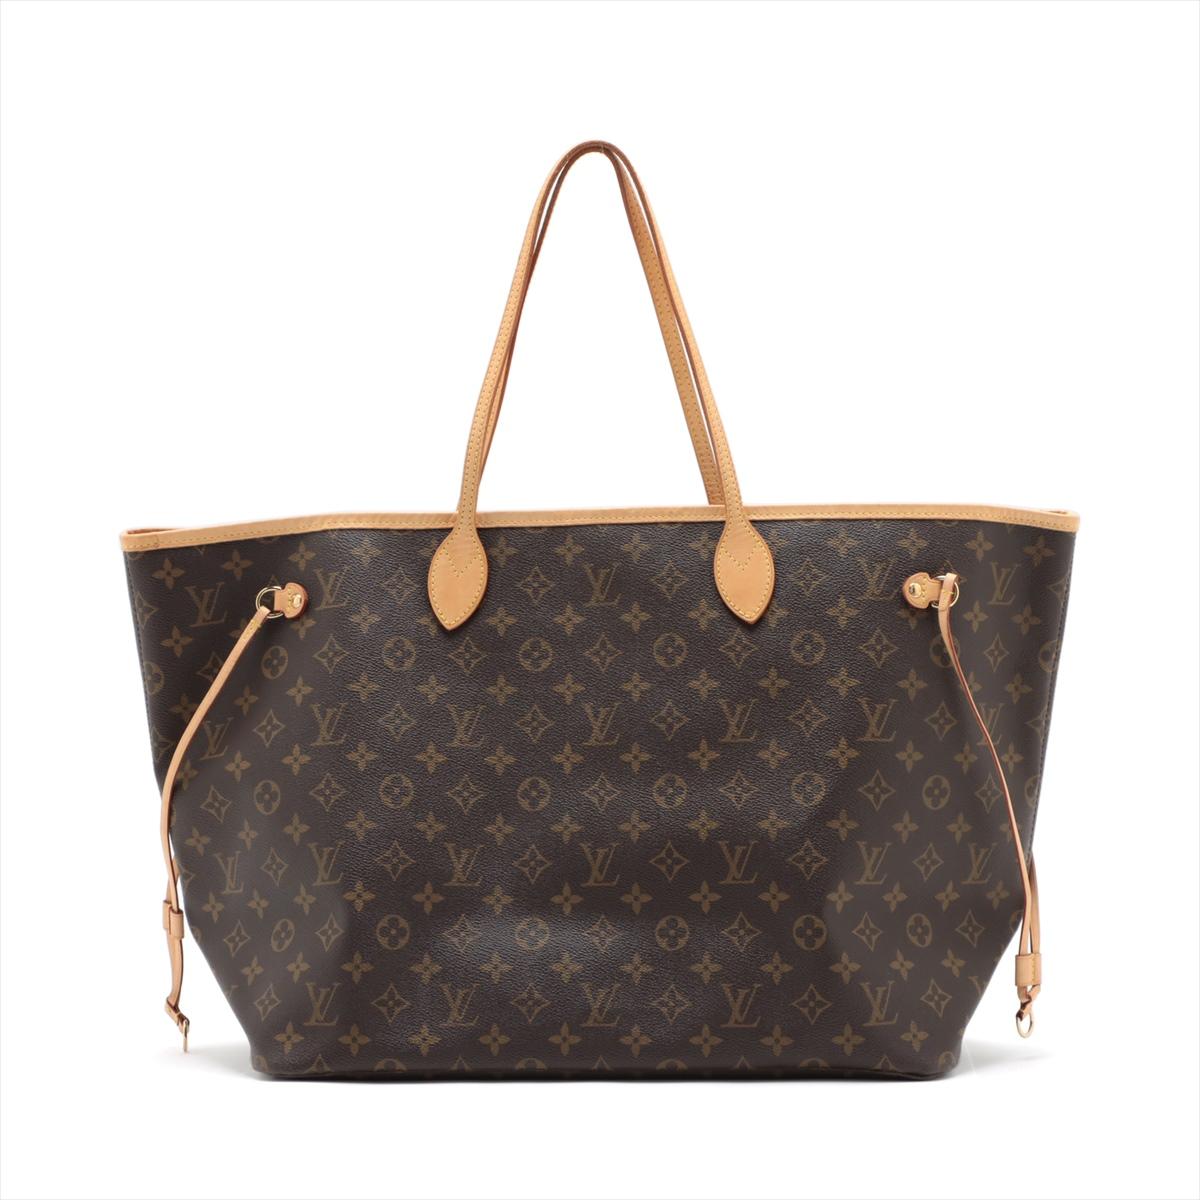 The Louis Vuitton Monogram Neverfull GM is a spacious and iconic tote bag designed for everyday use. Crafted in the signature Monogram canvas, it features the timeless LV monogram pattern that exudes luxury and sophistication. The generous size of